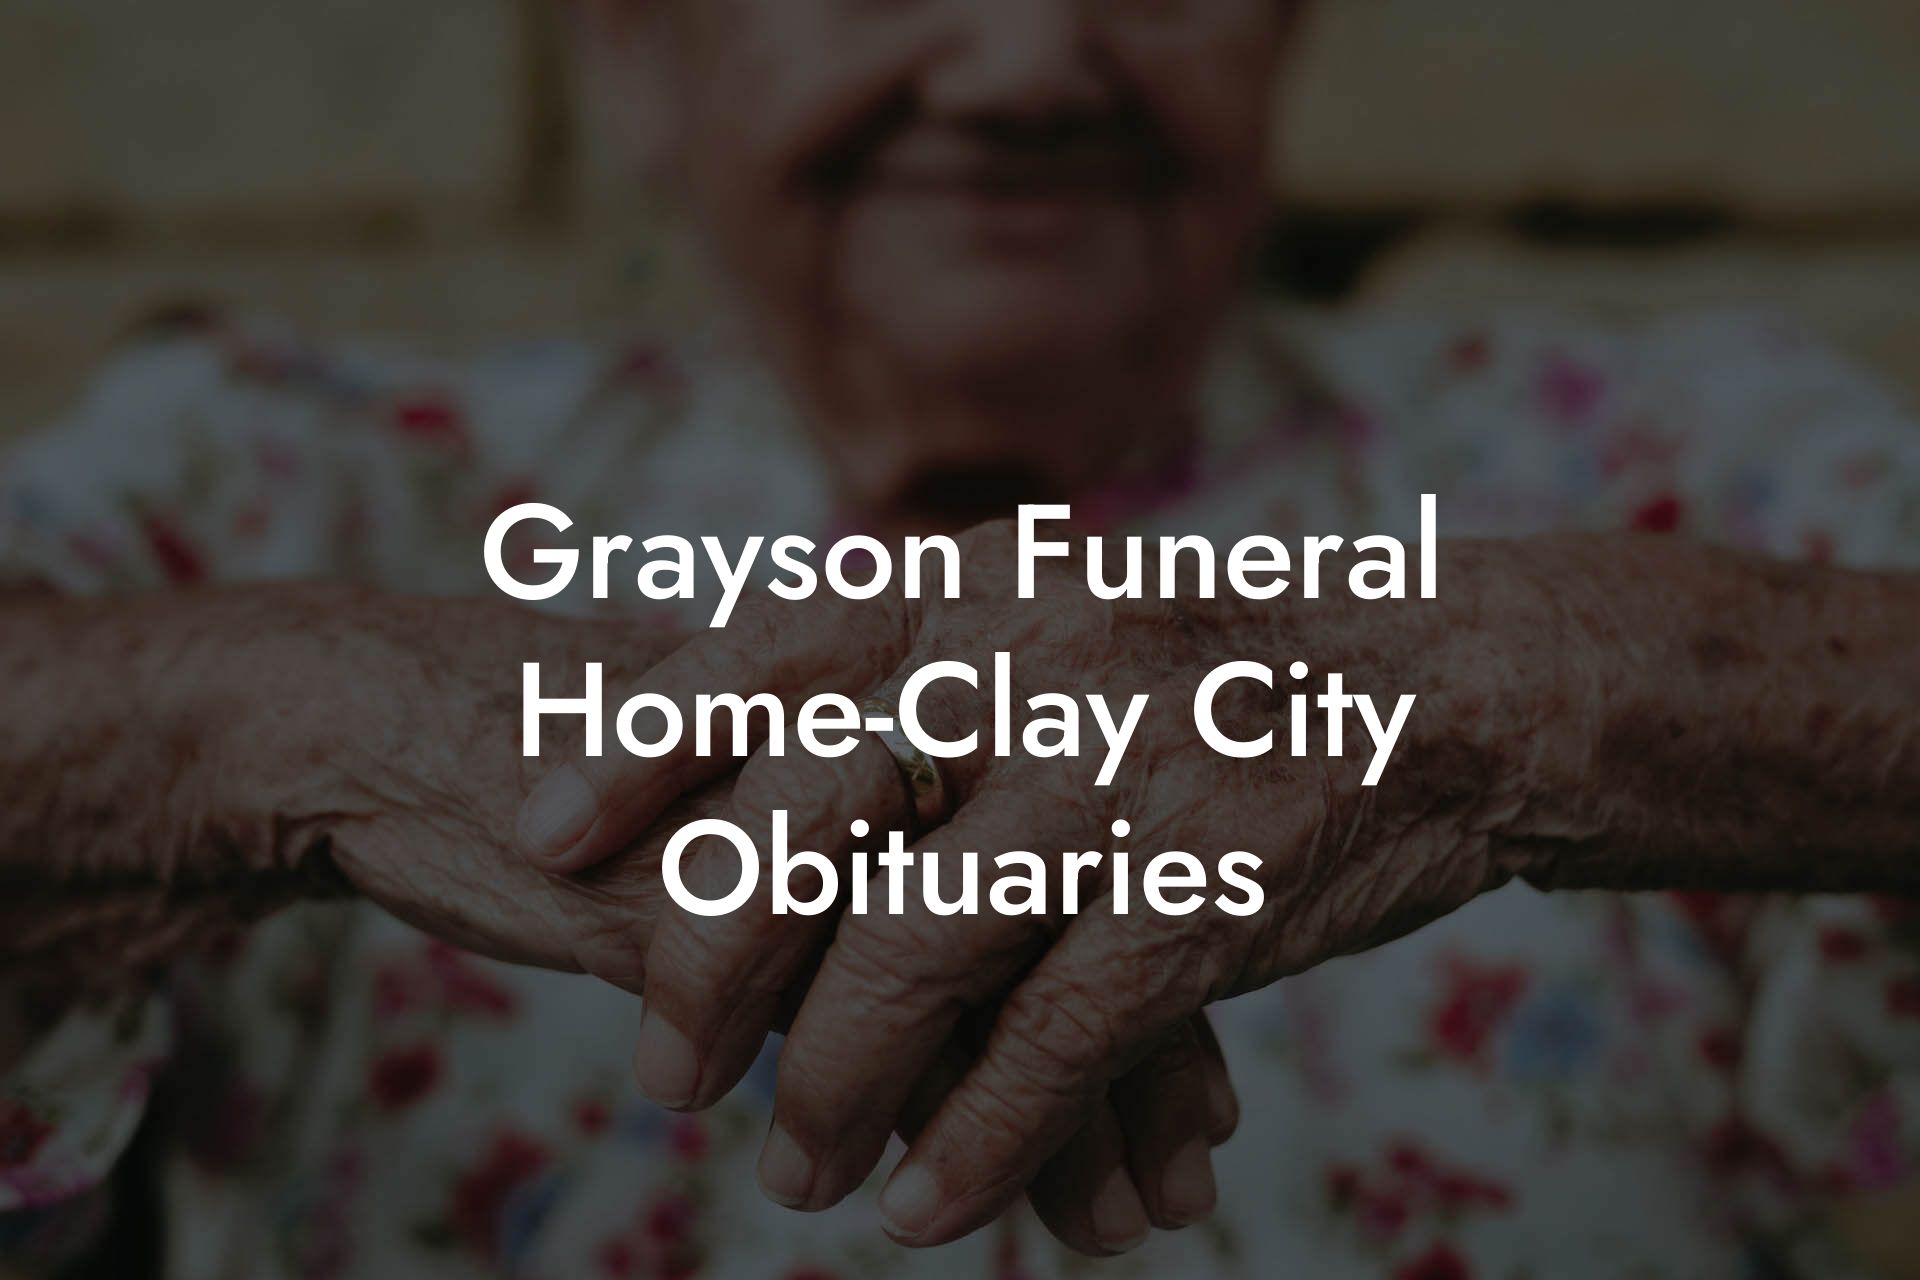 Grayson Funeral Home-Clay City Obituaries